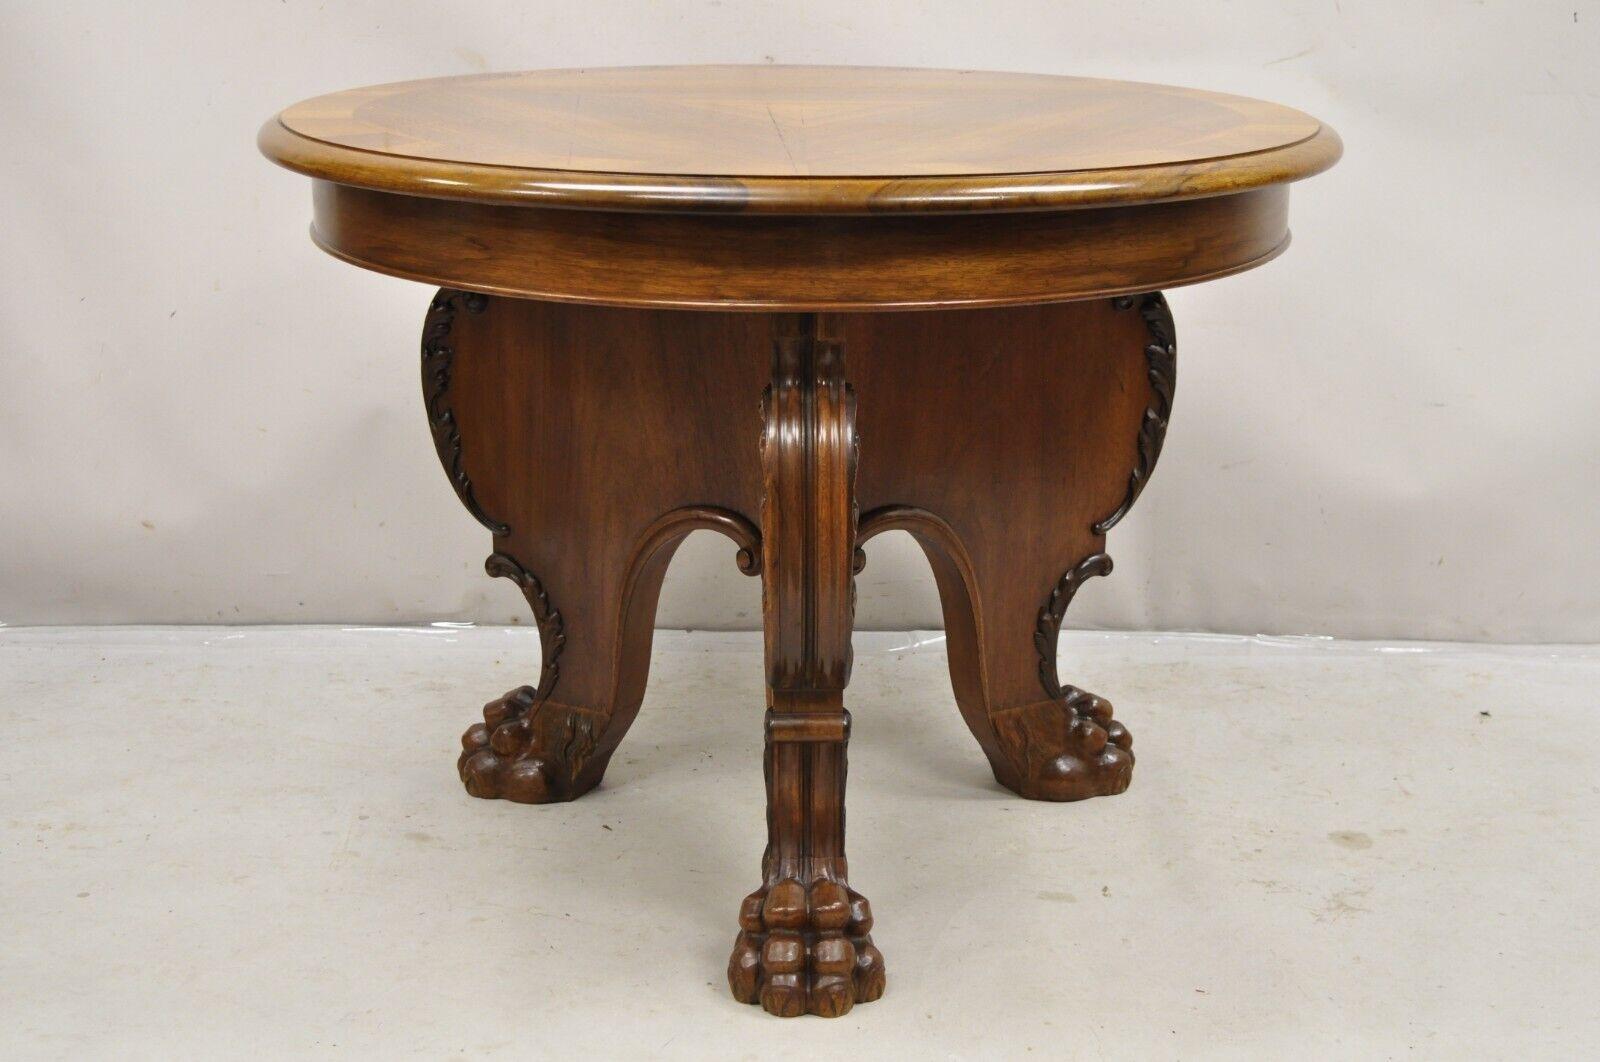 Antique German Renaissance Revival Carved Walnut Paw Feet Round Center Table by Leonardo Tisch. Item features a Tripod base with carved paw feet, round sunburst inlaid top, original German label, very nice antique table. Circa Early 1900s.